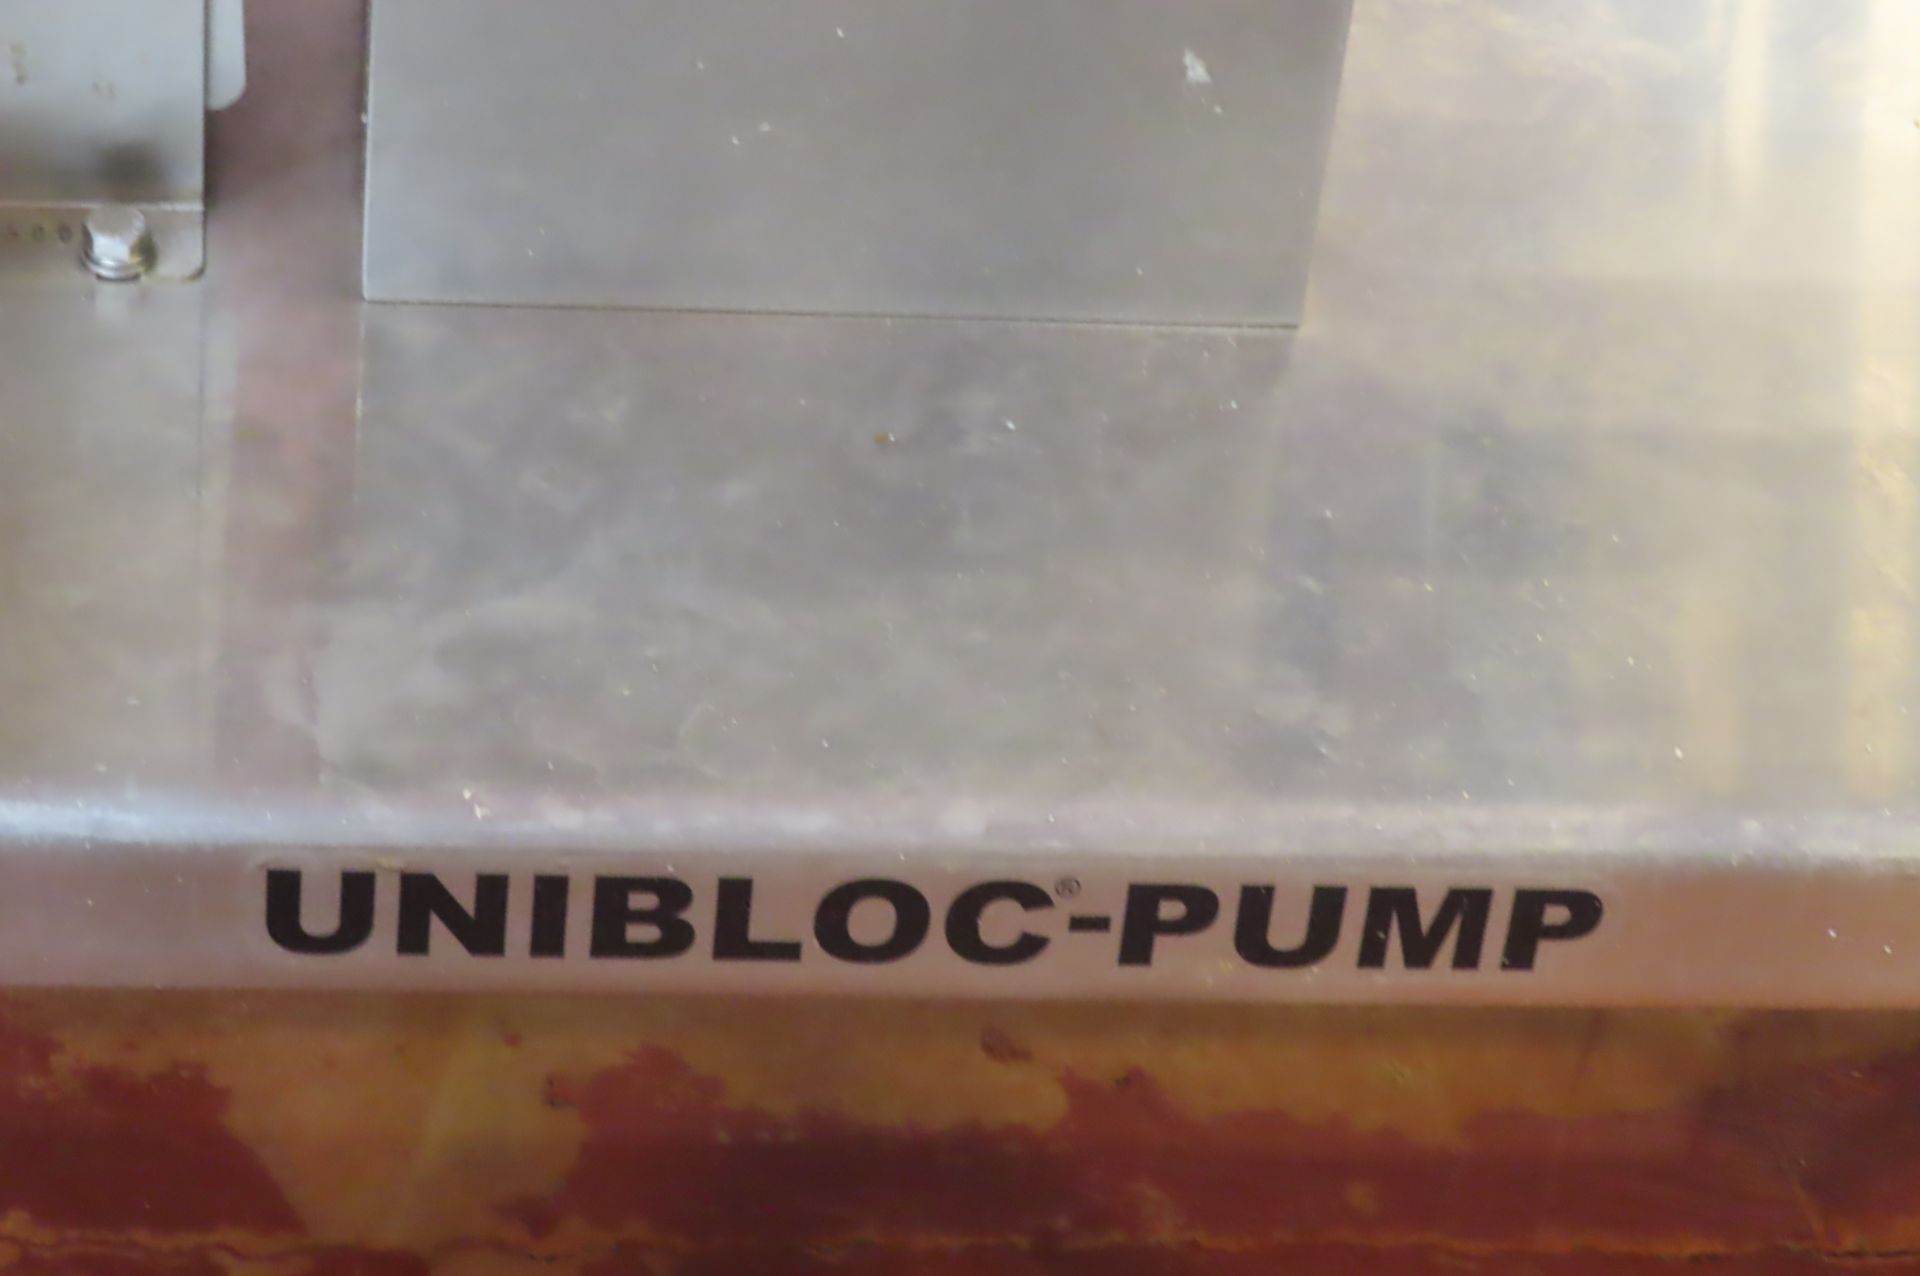 UNIBLOC CESSWDM3613T STAINLESS STEEL SHEAR PUMP, S/N 23771 - Image 5 of 5